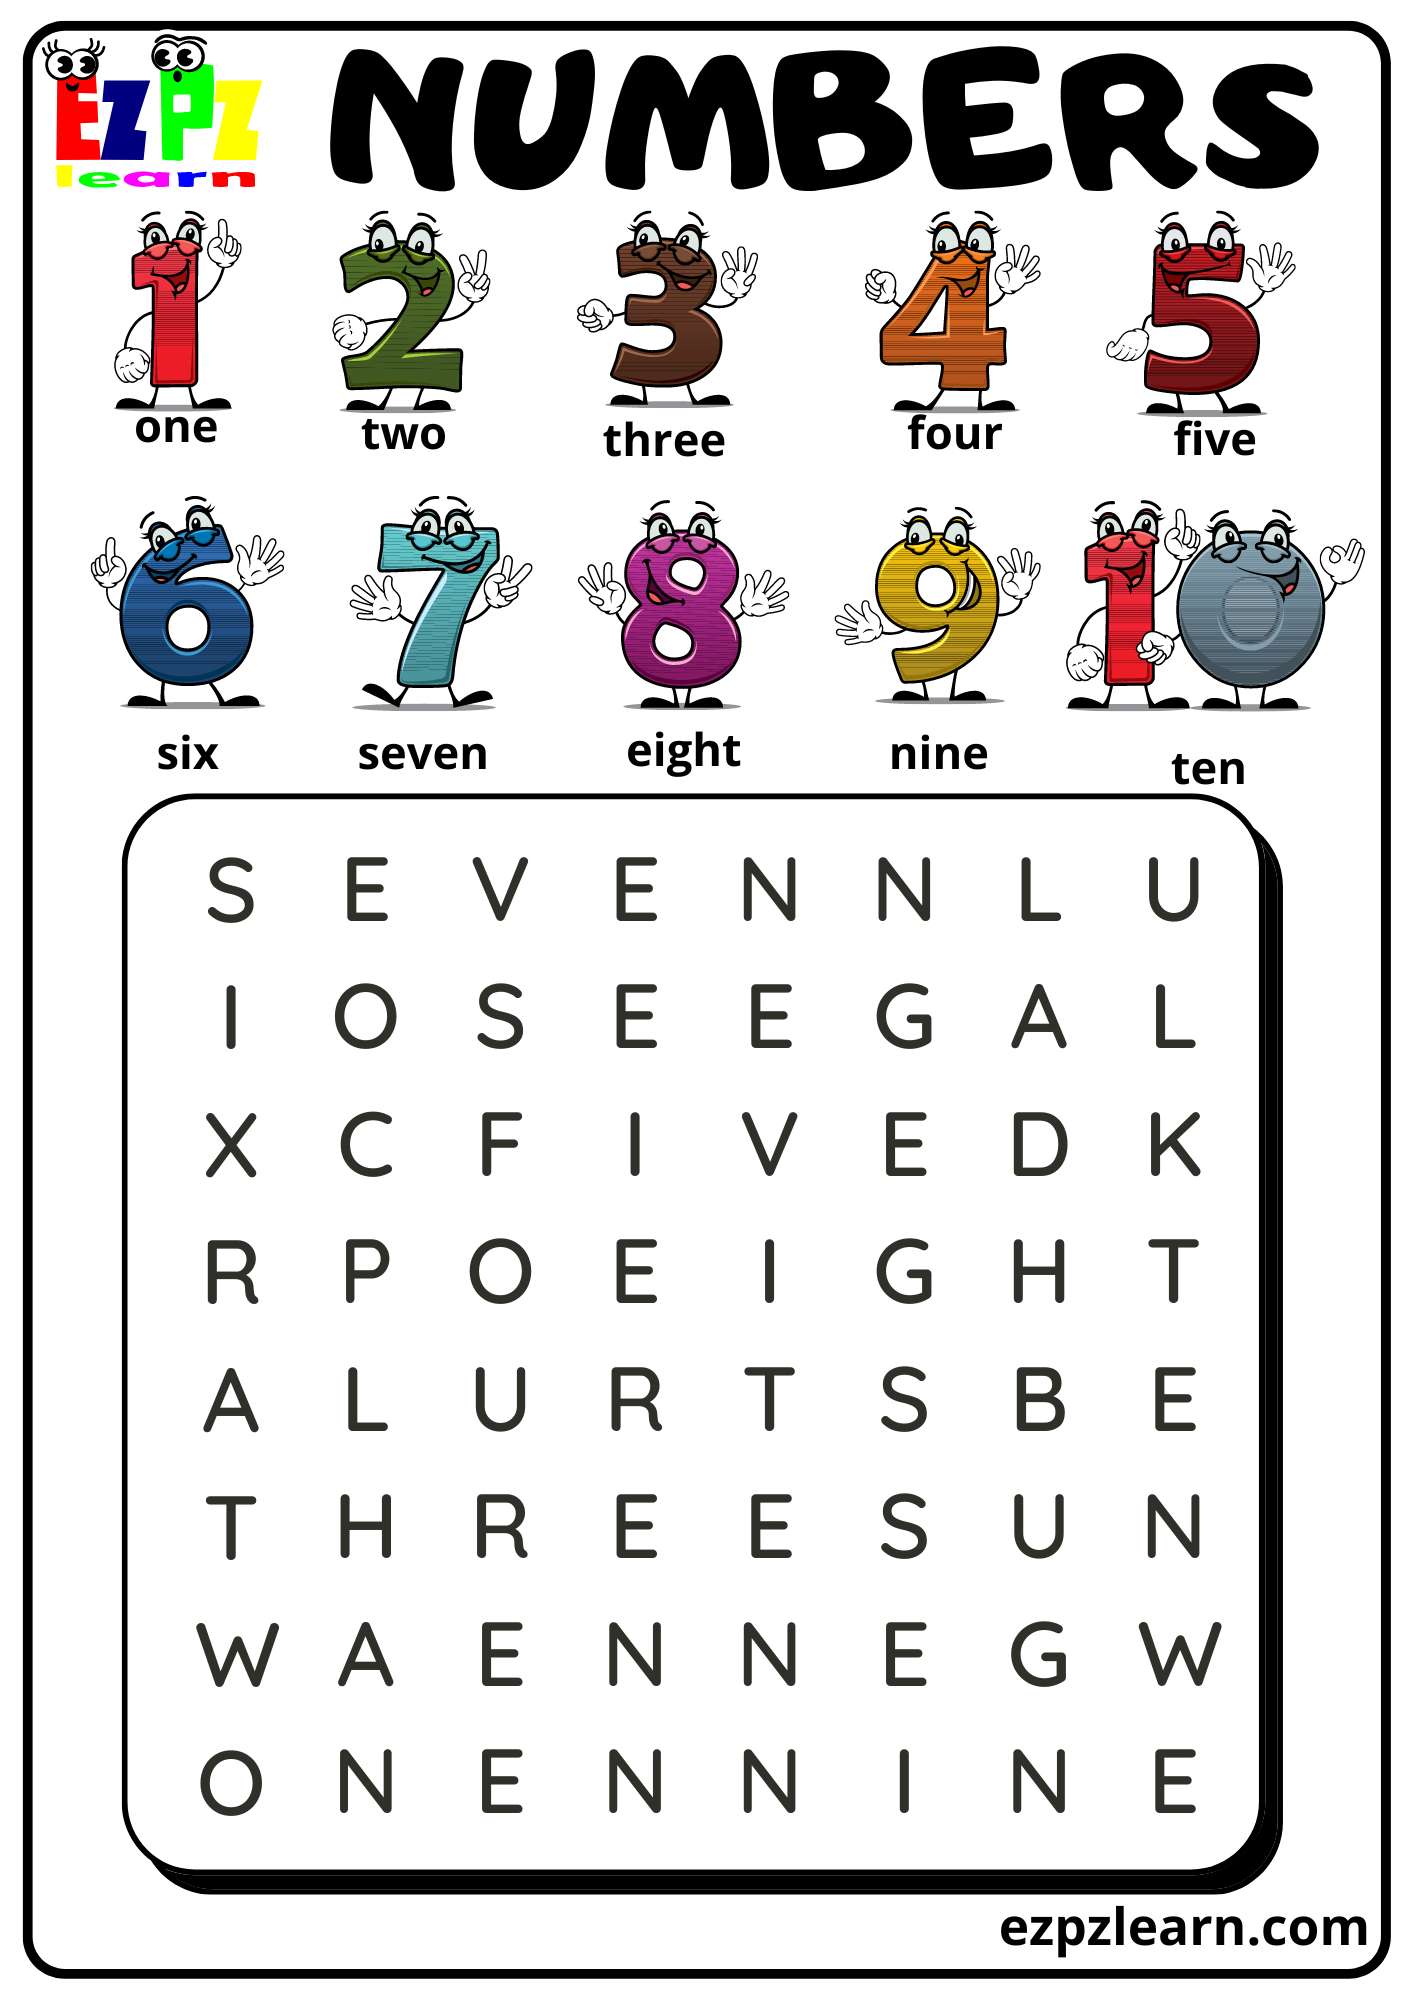 numbers-1-to-10-word-search-worksheet-pdf-download-ezpzlearn